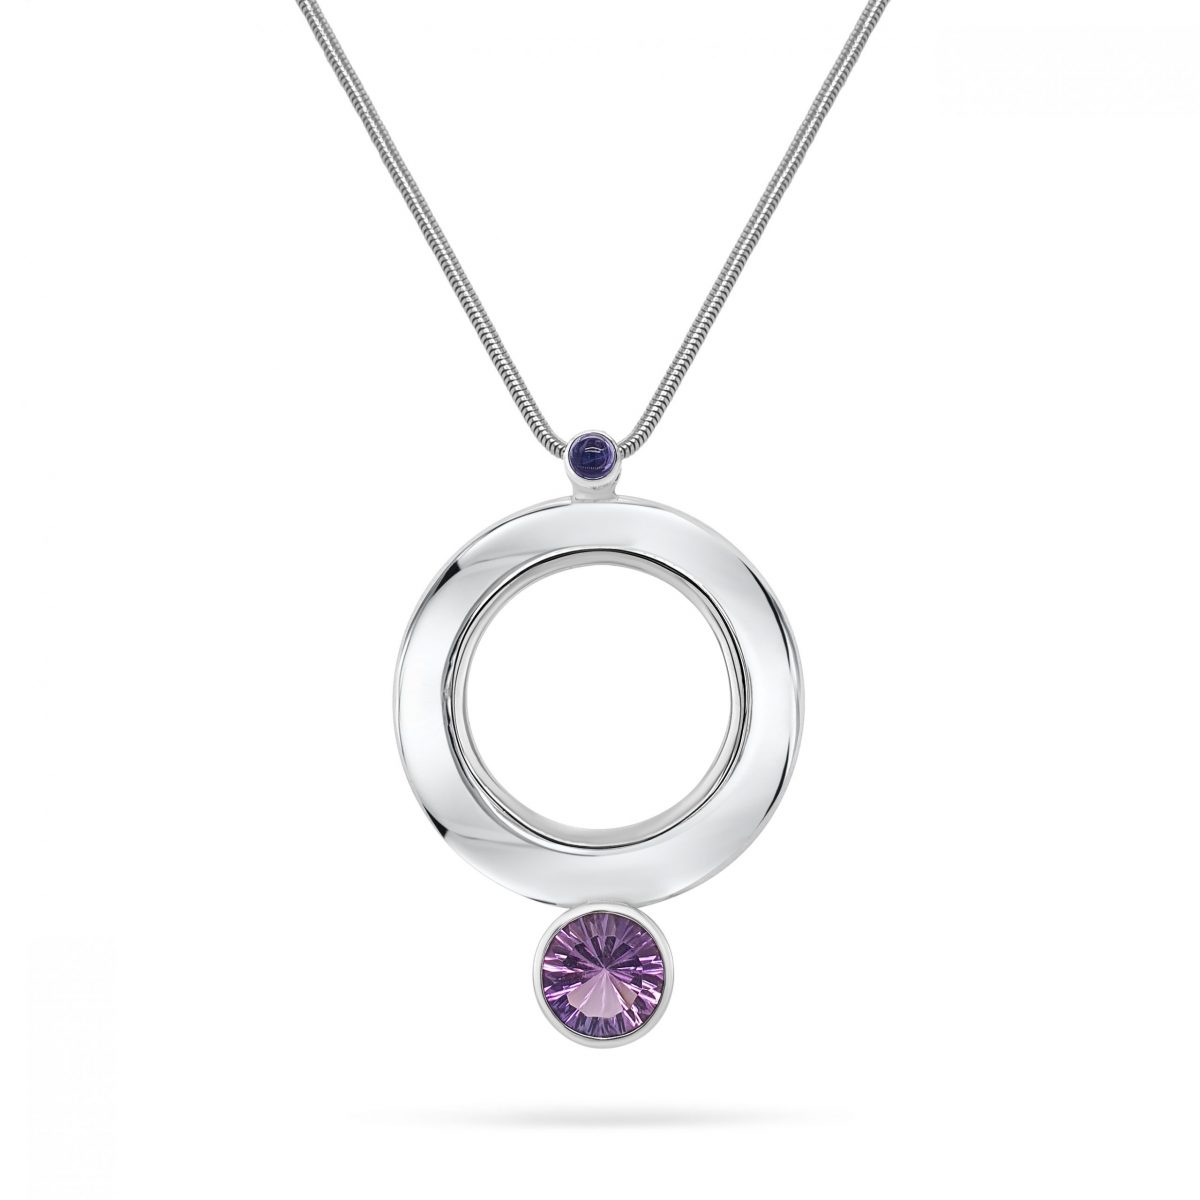 Cathal Barber Goldsmith Hand-Made Amethyst and Iolite Circle Pendant in Silver